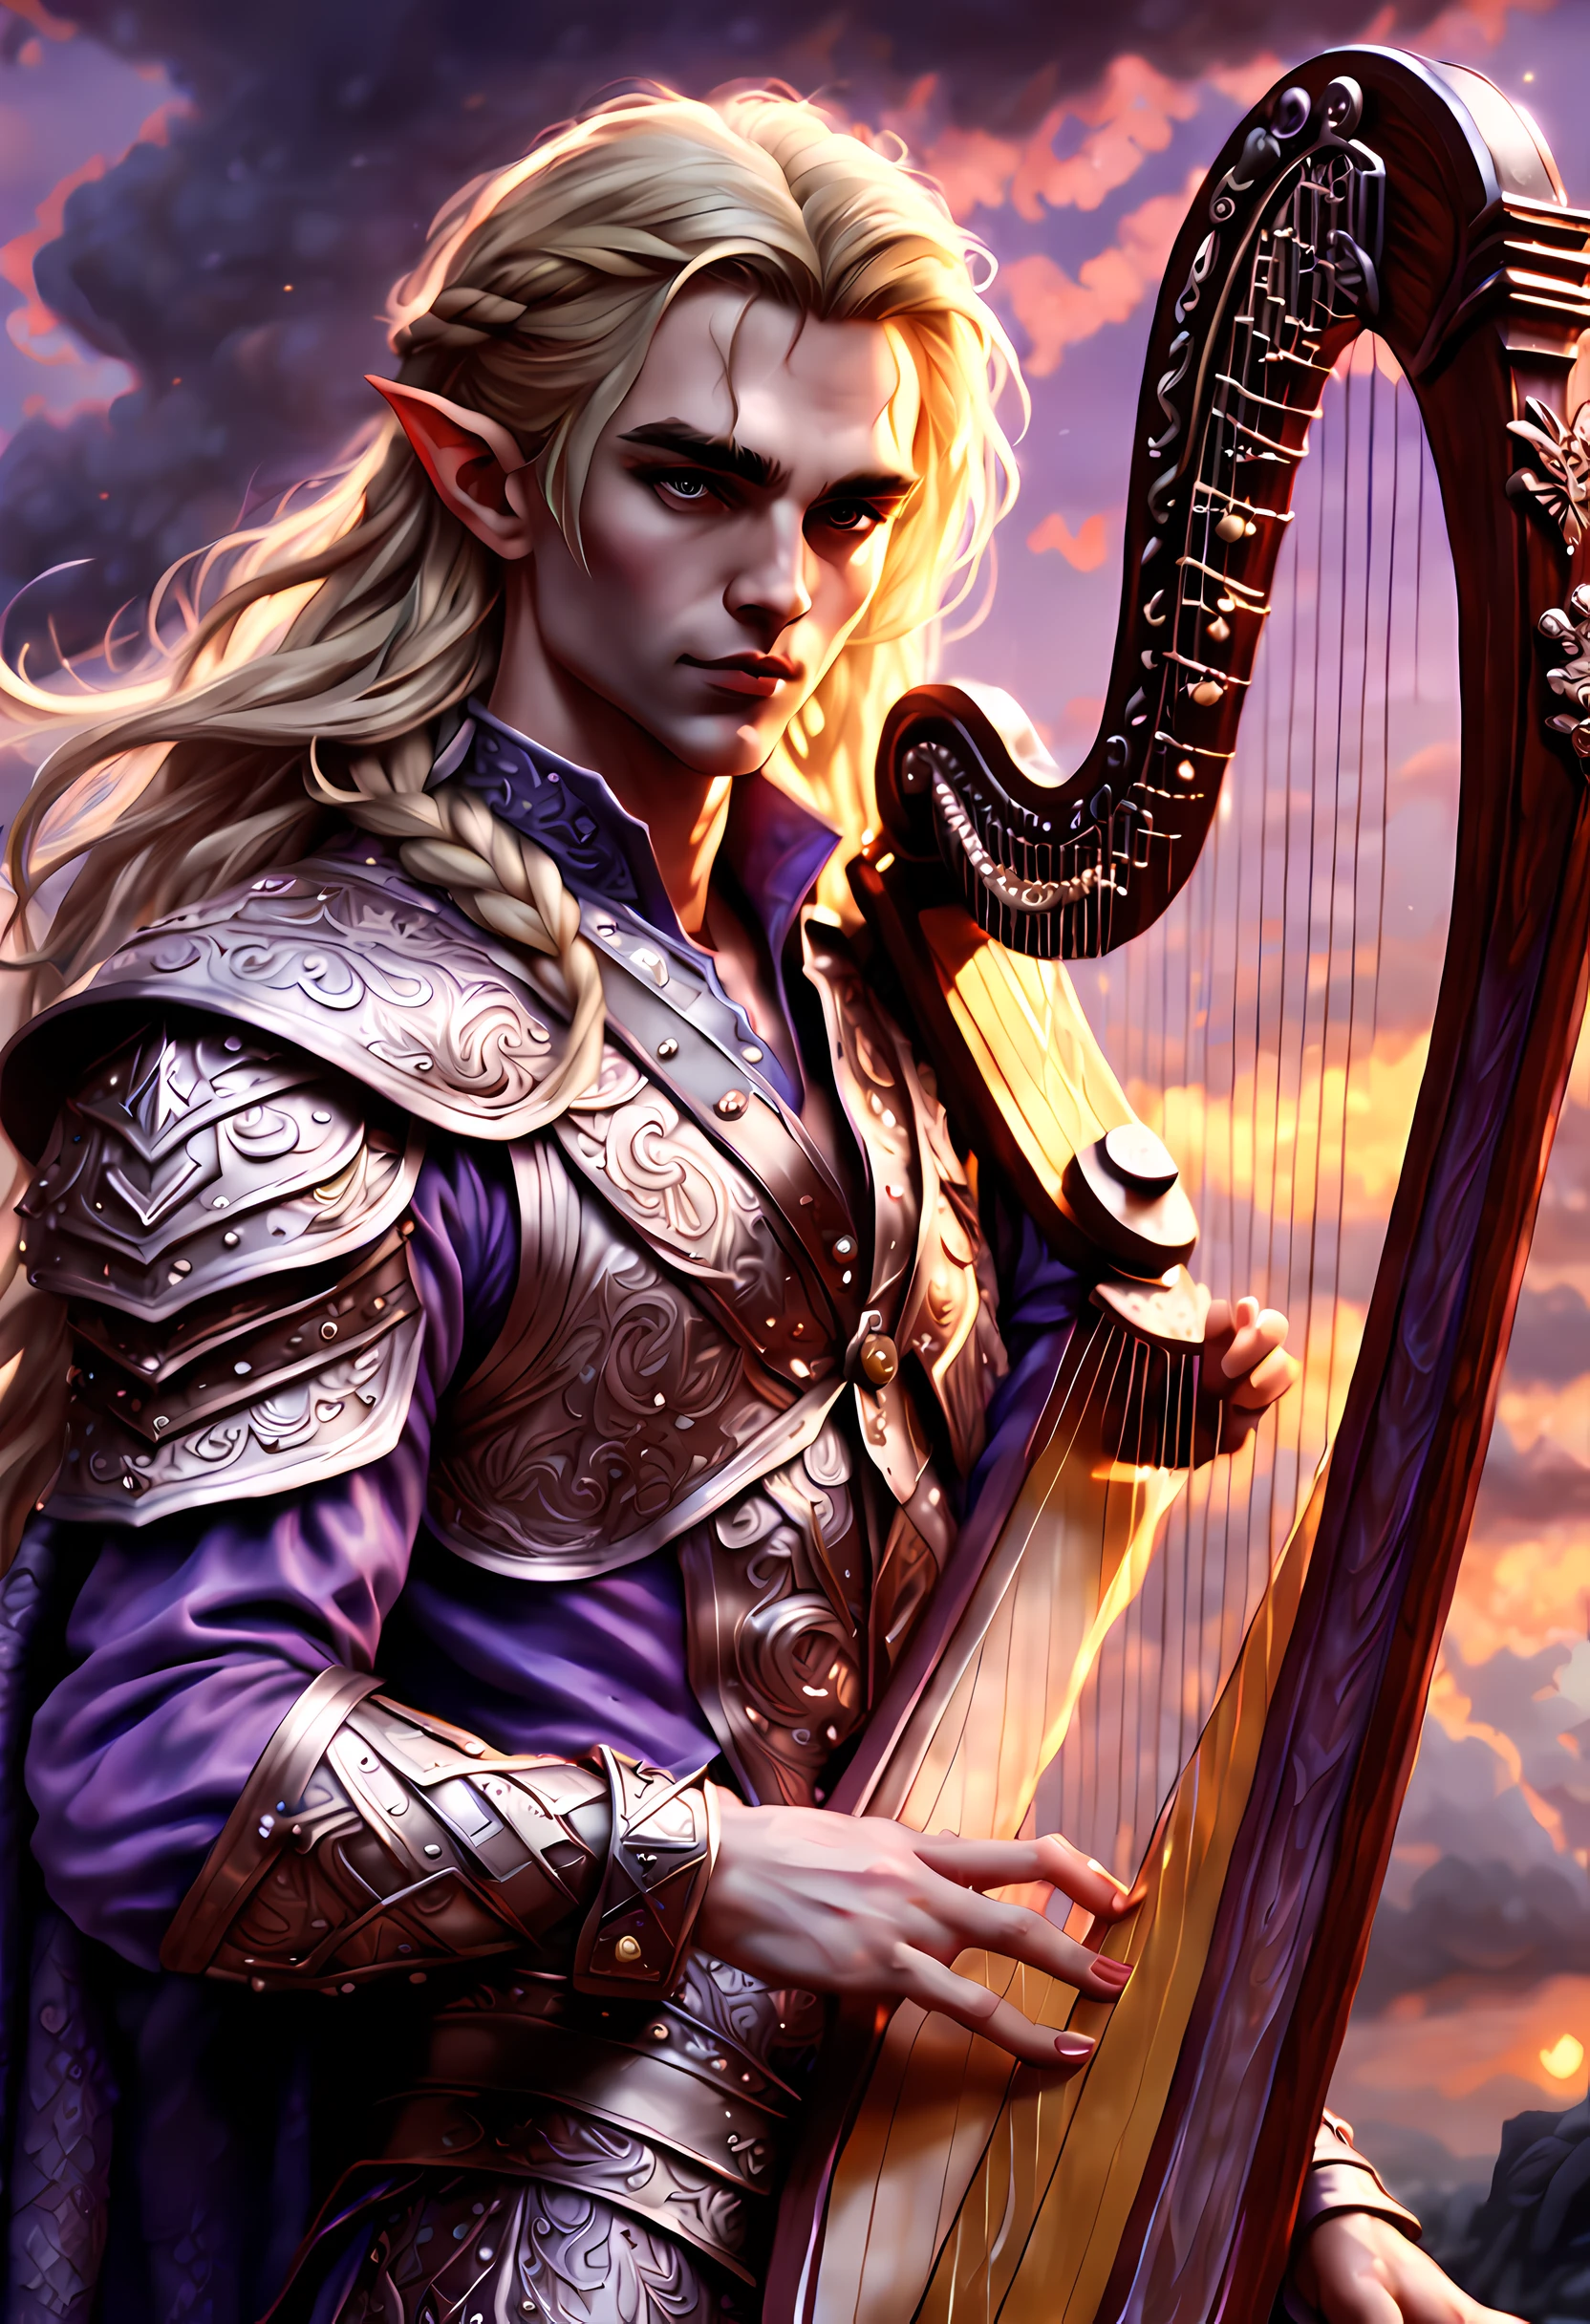 antasy art, dnd art, RPG art, wide shot, drkfntasy (masterpiece:1.3), full body, intense details, highly detailed, photorealistic, best quality, highres, portrait of 1(male: 1.4) half elf (fantasy art, Masterpiece, best quality: pale skin, intense details facial detail (fantasy art, Masterpiece, best quality: 1.4) bard, exquisite beauty, (blond hair: 1.3), braided hair, smirking in arrogance, intense purple eyeantasy art, Masterpiece, best quality: 1.3) holding a ( small harp: 1.4) (fantasy art, Masterpiece, best quality: 1.4)wearing heavy (heavy armor, wearing) F41Arm0rXL wearing laced boots, wearing a cloak, smiling an arrogant smile, standing in fantasy street, there are (dark red clouds: 1.3) , (dark yellows clouds: 1.3) above, sense of gloom, sense of dread, depth of field, reflection light, high details, best quality, 16k, [ultra detailed], masterpiece, best quality, (extremely detailed), dynamic angle, ultra wide shot, photorealistic, RAW, fantasy art, dnd art, fantasy art, realistic art